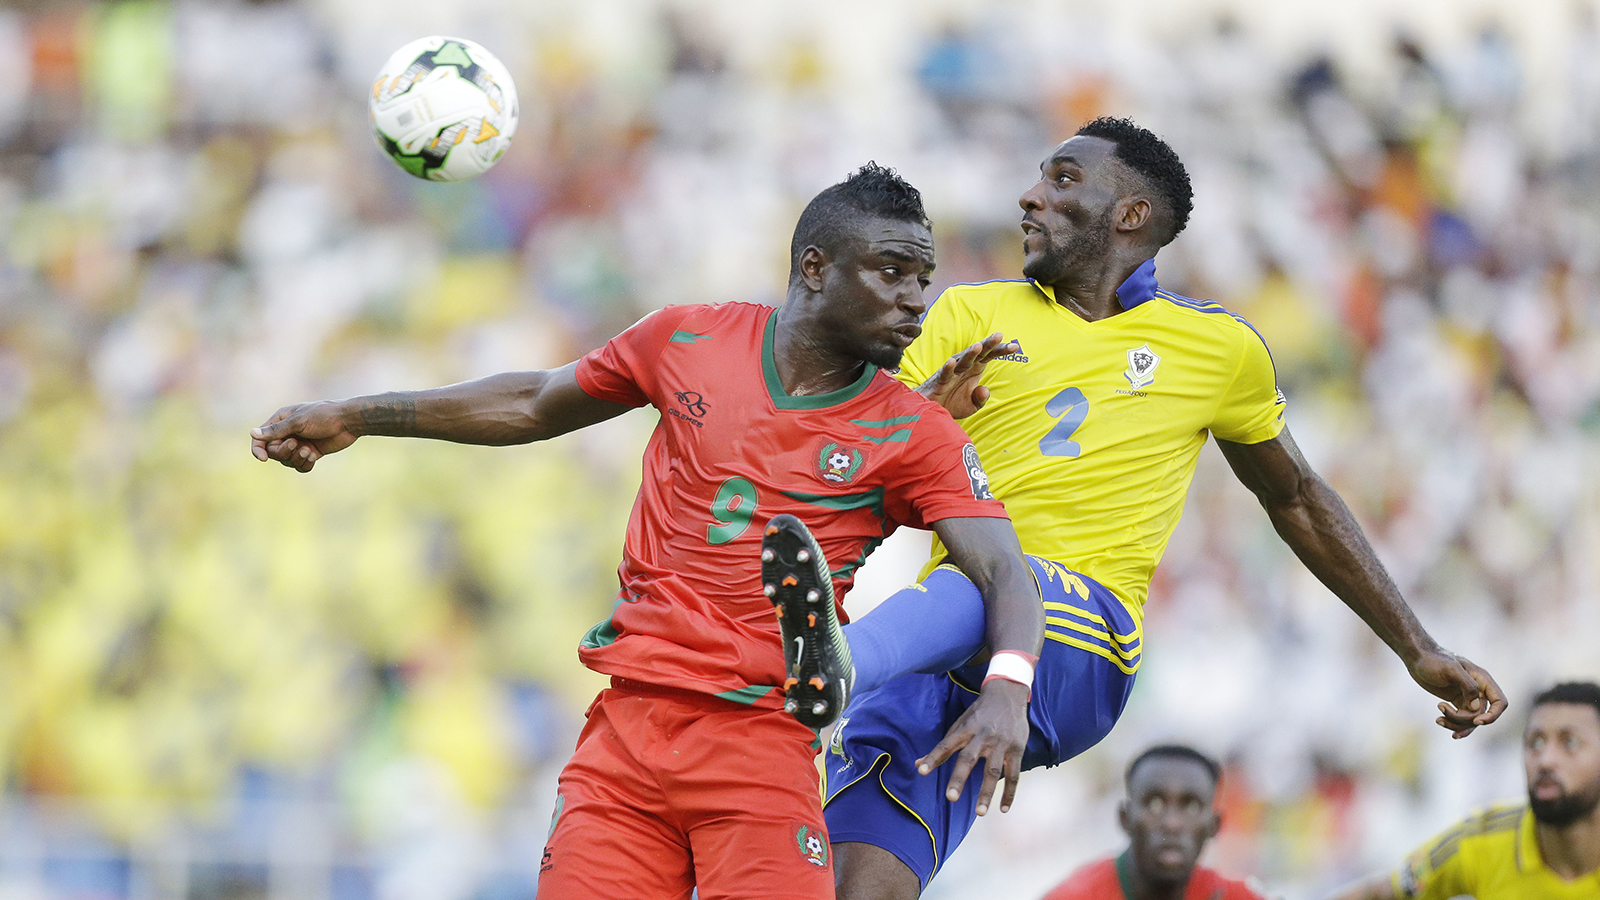 Gabon's Pierre Aaron Appindangoye, right, is challenged by Guinea Bissau's Abel Camara, left, during the African Cup of Nations Group A soccer match between Gabon and Guinea Bissau at the Stade de l'Amitie, in Libreville, Gabon Saturday Jan. 14, 2017. (AP Photo/Sunday Alamba)